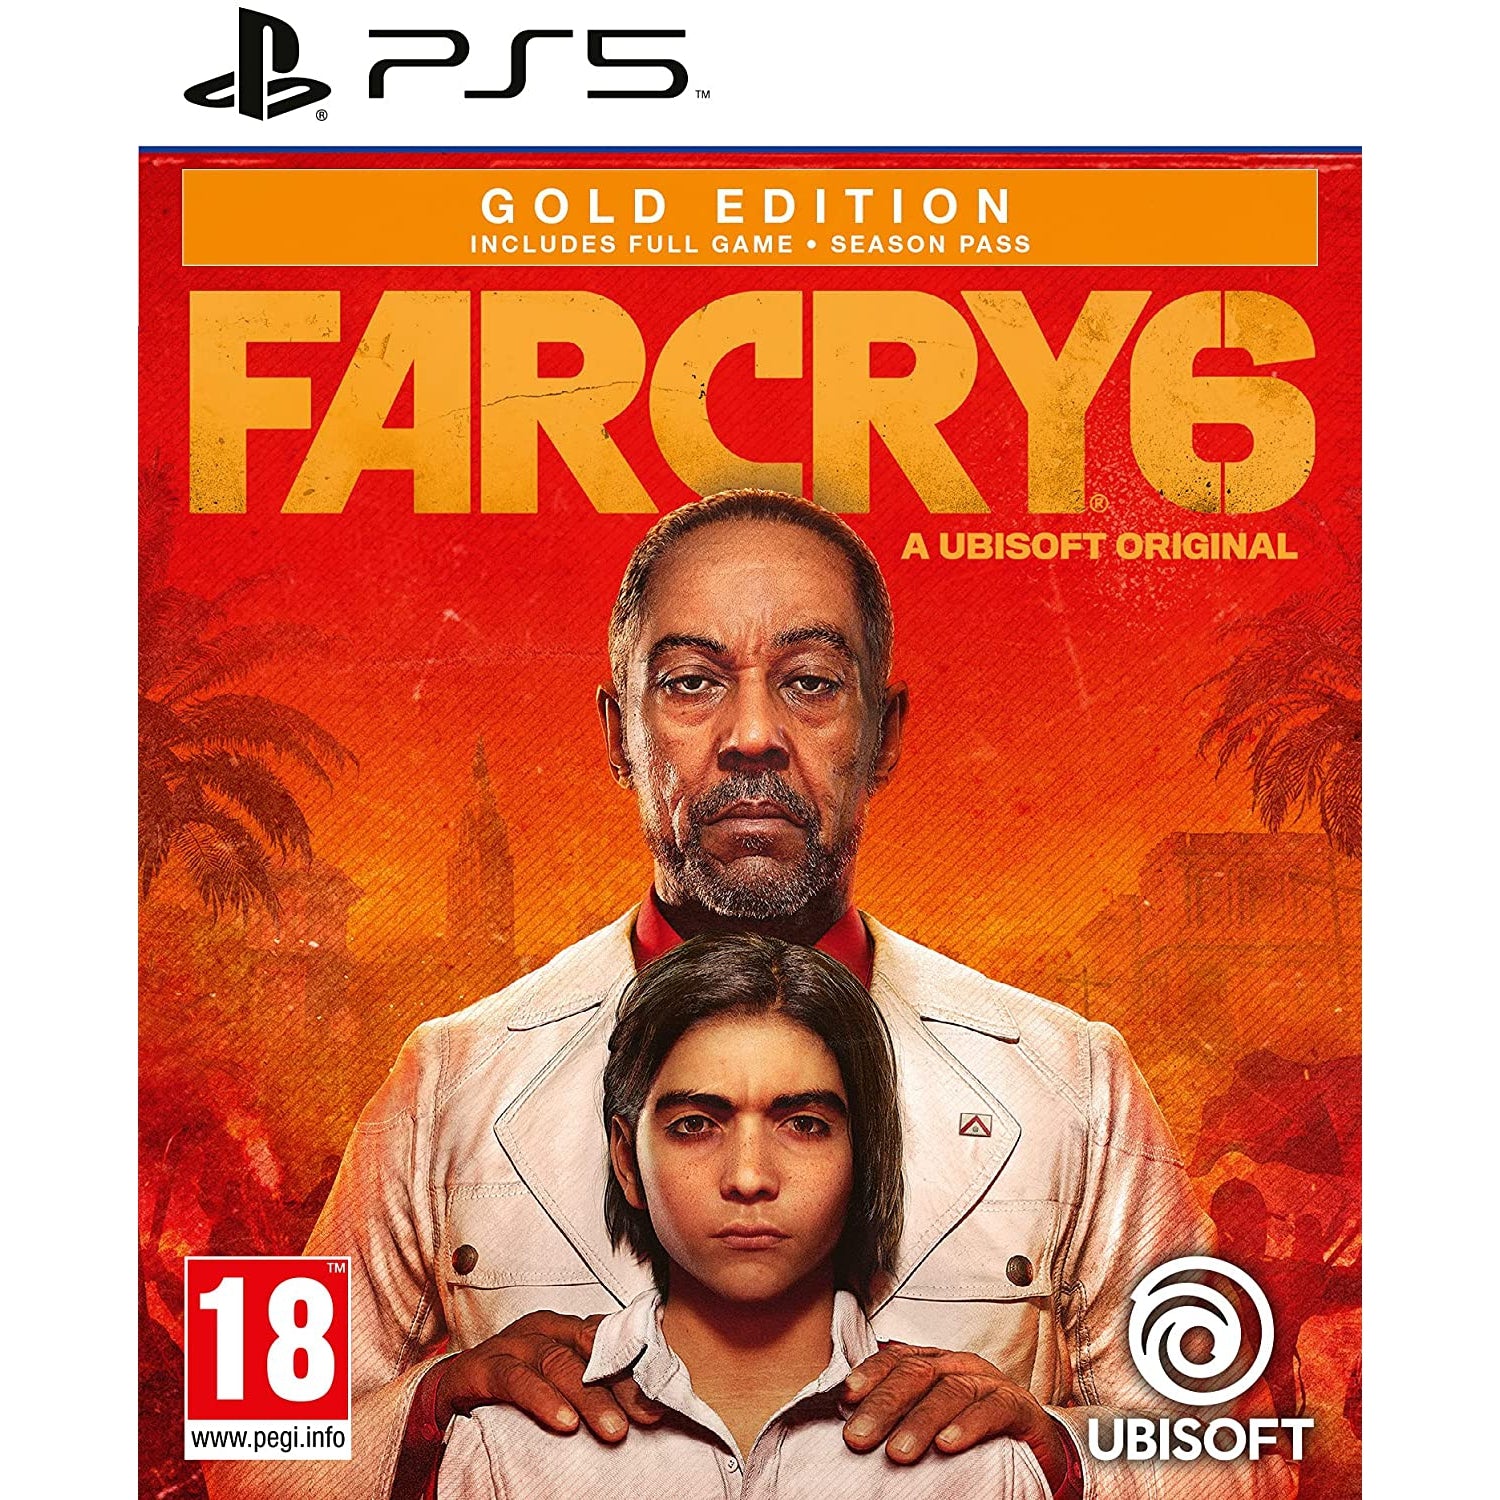 Far Cry 6: Gold Edition (PS5)